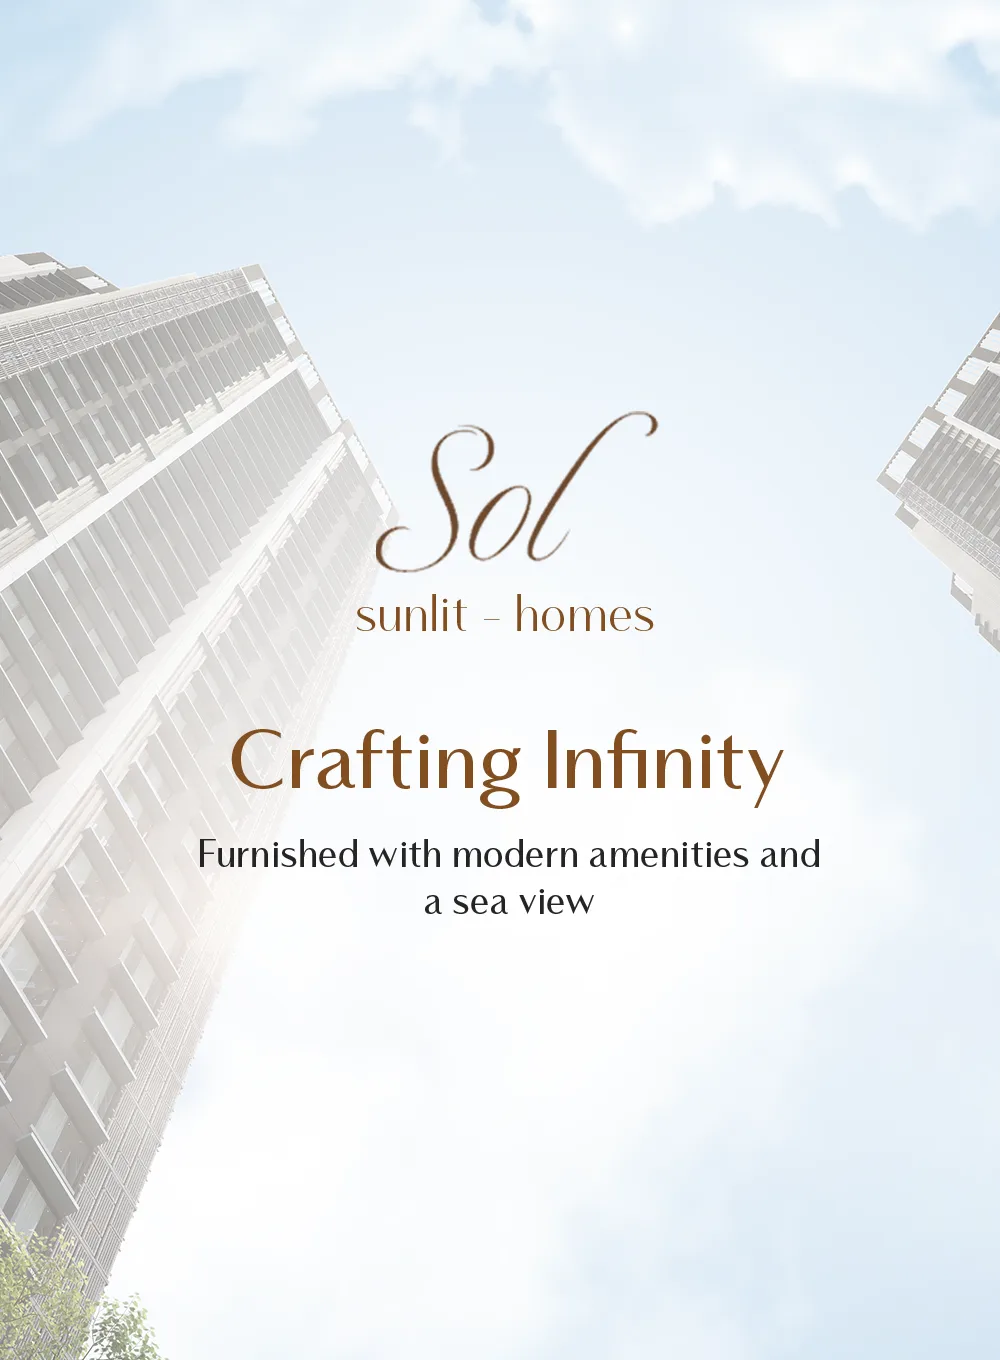 simana-sol-home-with-vitamin-d-natural-lit-homes-crafiting-infinite-living